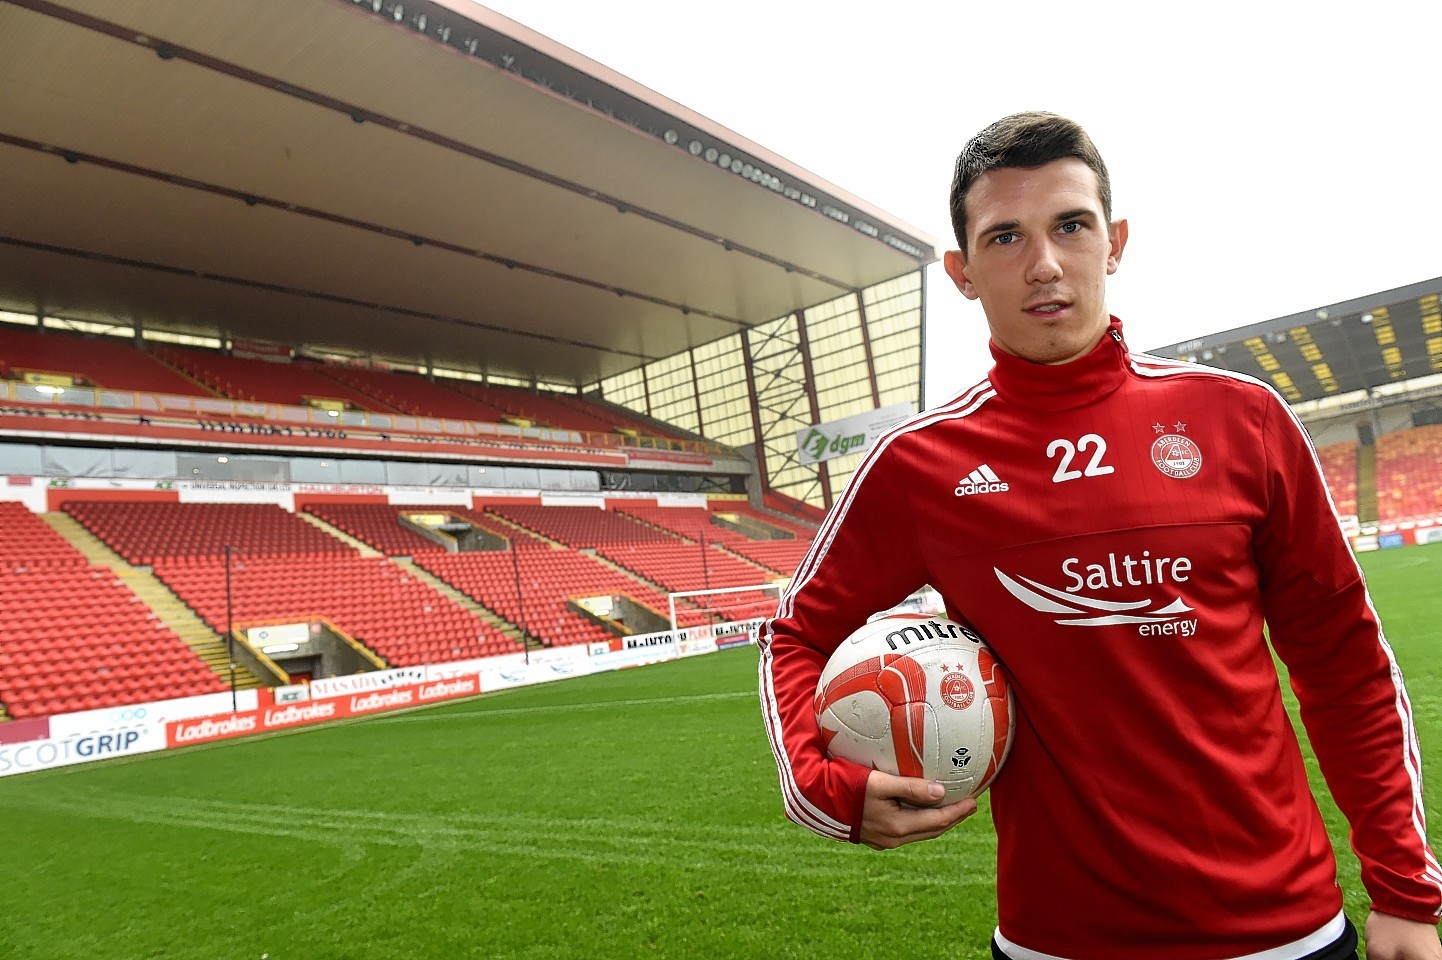 Jack is expected to start in the heart of the Dons midfield today